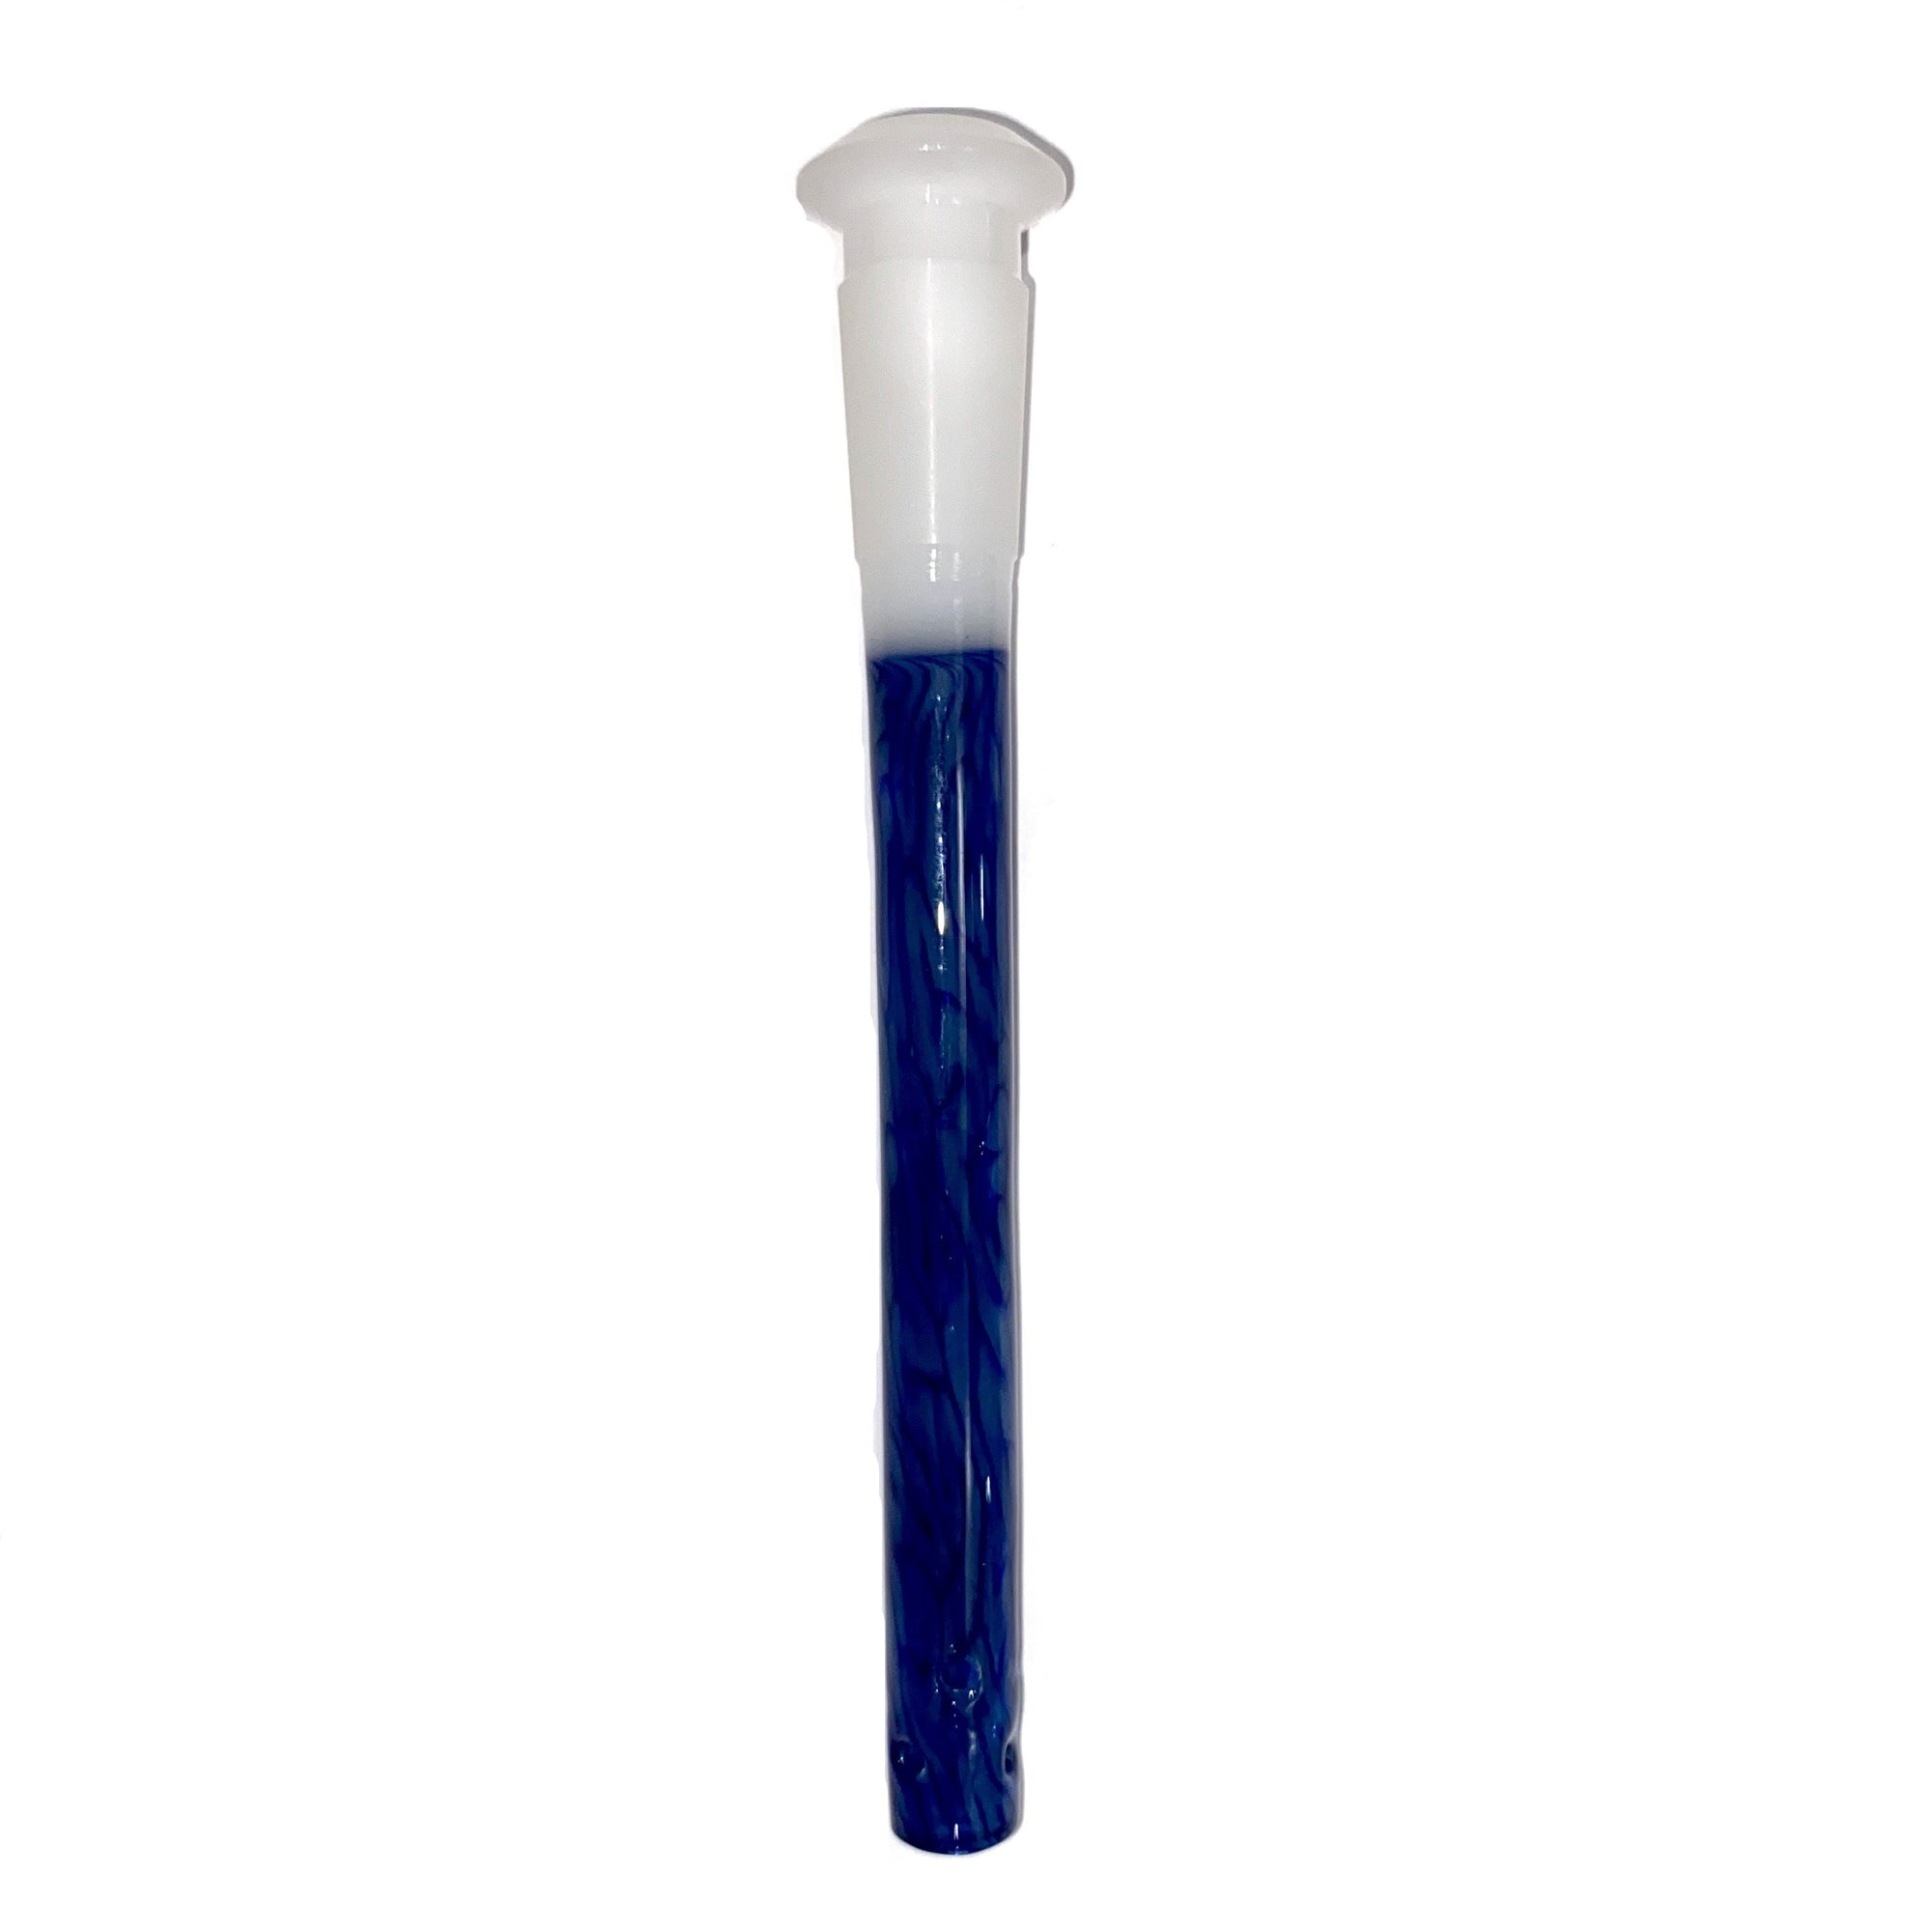 Dustorm 18/14 Brain Tech Downstem (Blue with White Joint) show variants